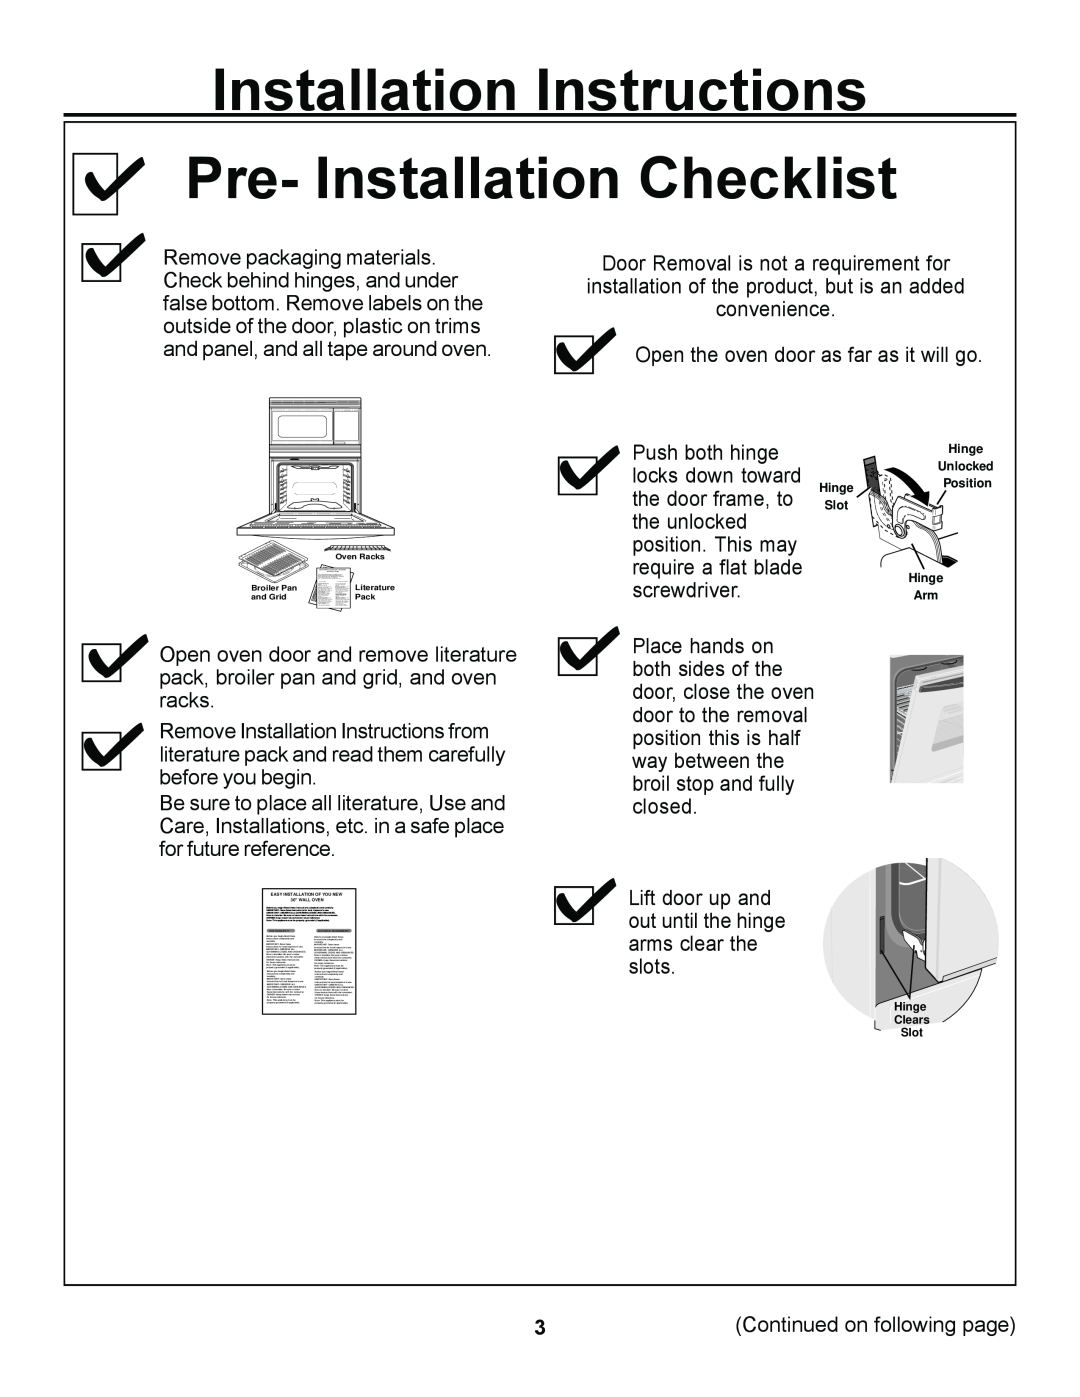 Cowon Systems JKP85 Pre- Installation Checklist, Installation Instructions, Continued on following page 